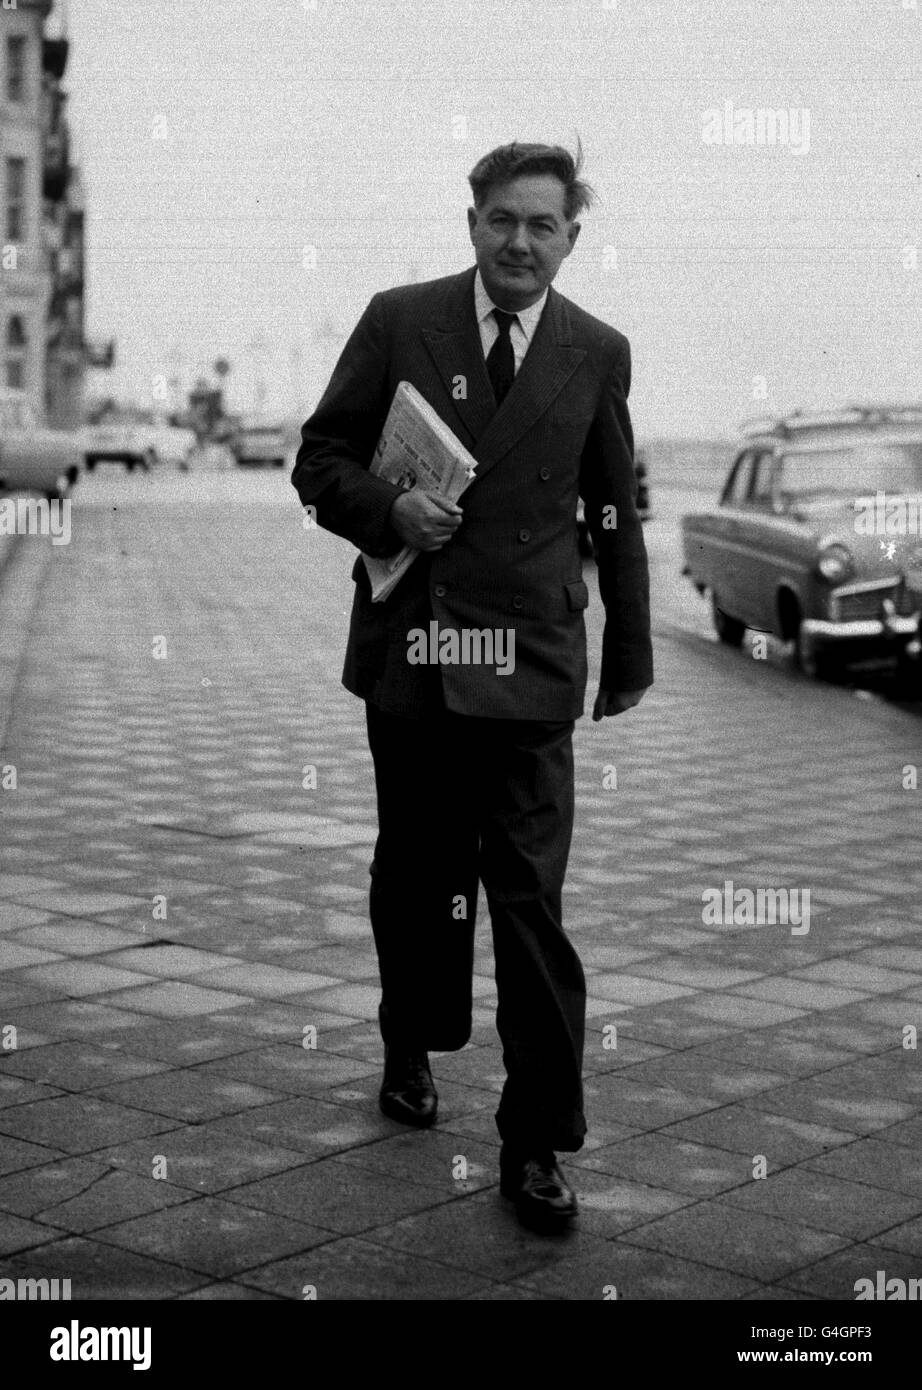 PA NEWS PHOTO 28/9/62 JAMES CALLAGHAN IN BRIGHTON TO ATTEND A MEETING OF THE LABOUR PARTY NATIONAL EXECUTIVE TO DISCUSS THE PARTY'S ATTITUDE TO THE COMMON MARKET Stock Photo